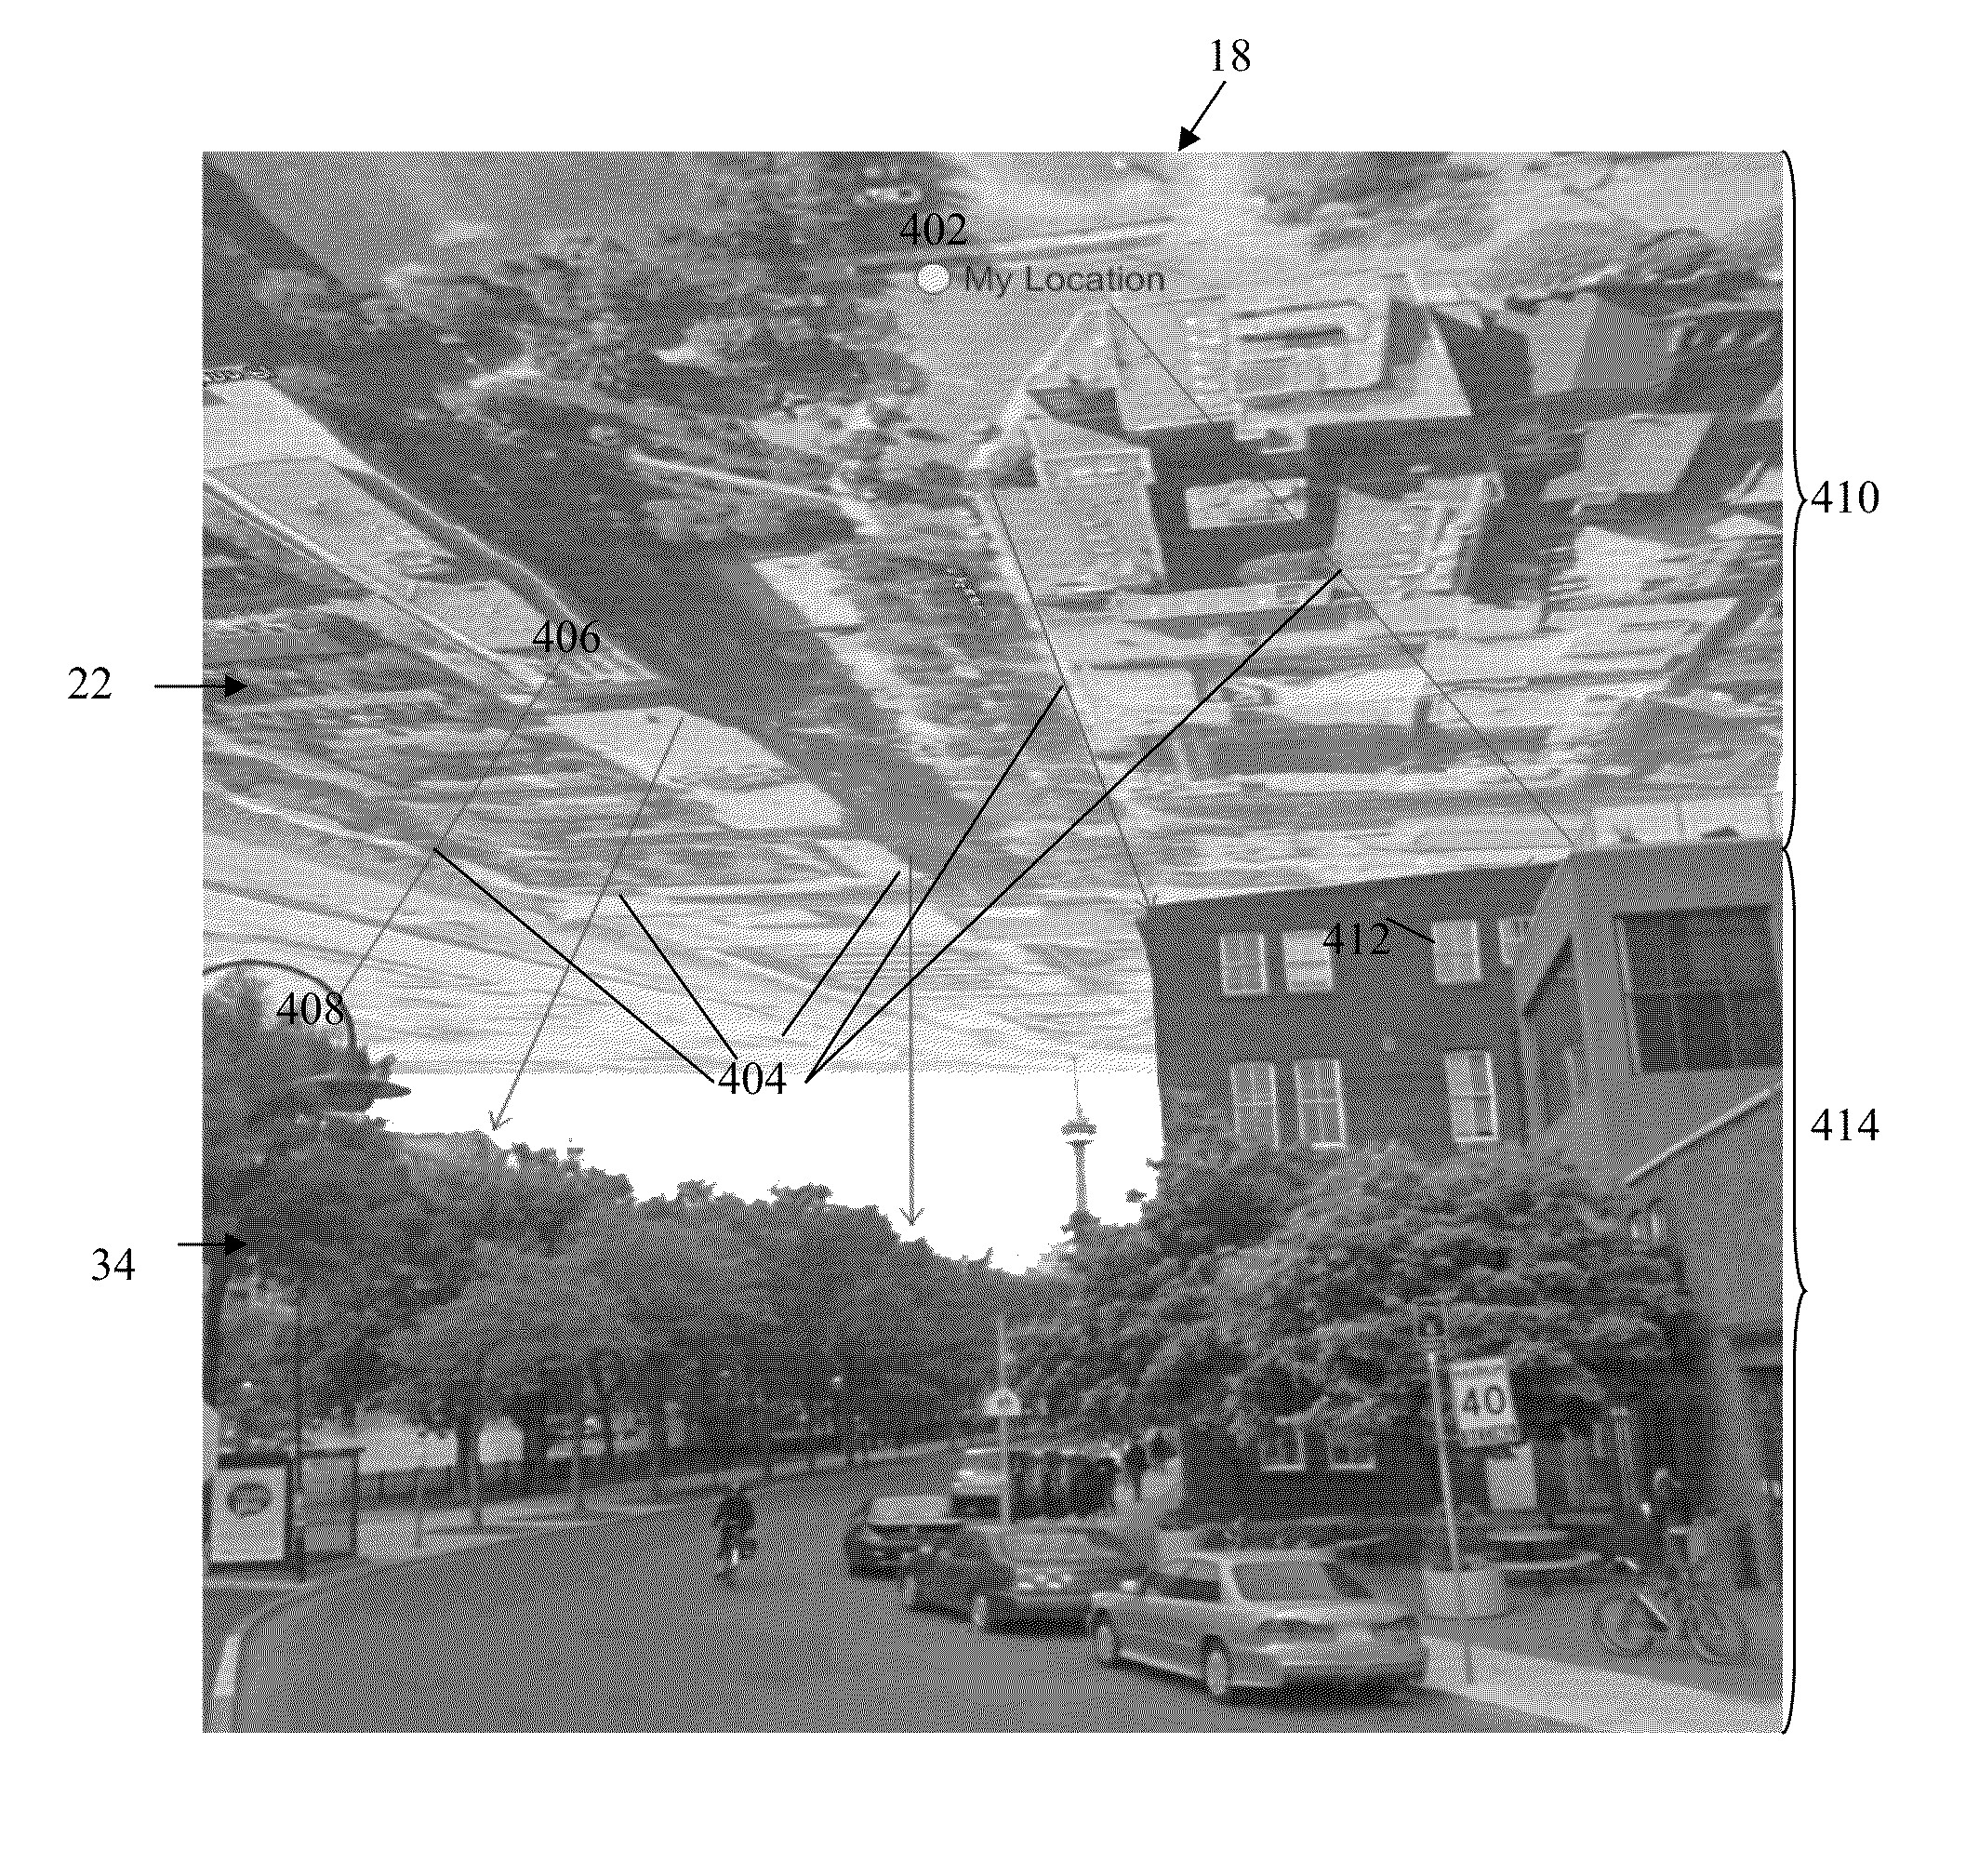 System and method for creating and displaying map projections related to real-time images